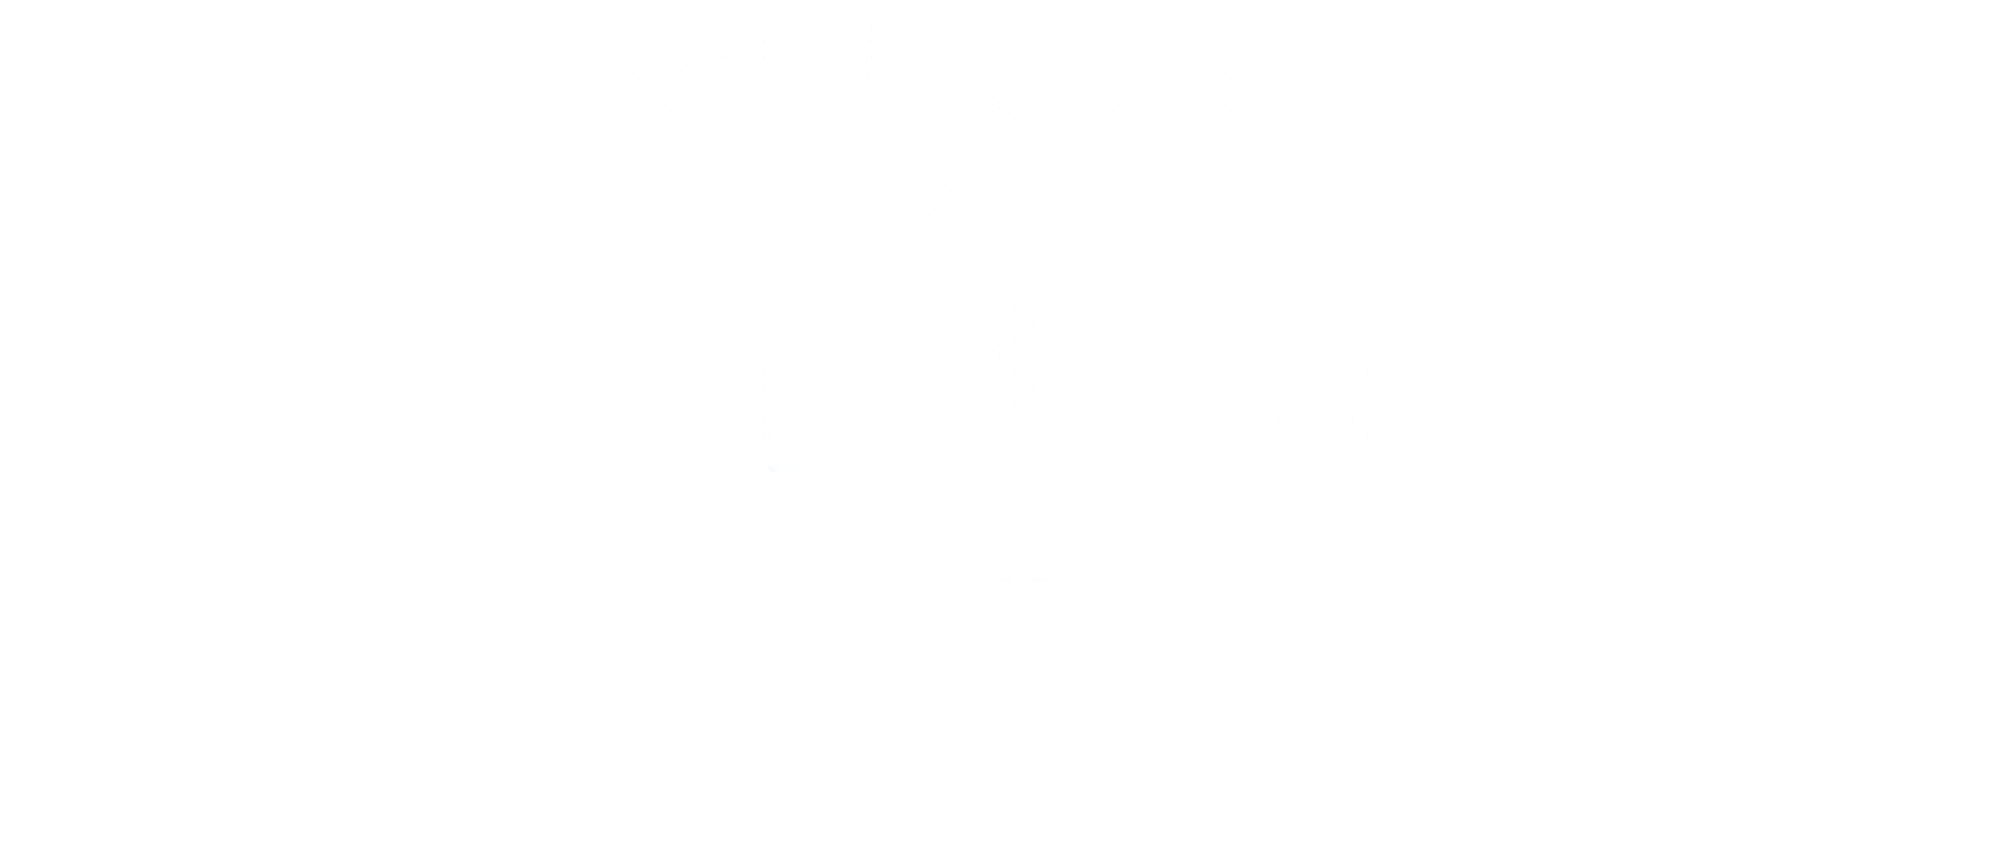 Connect Market Solutions